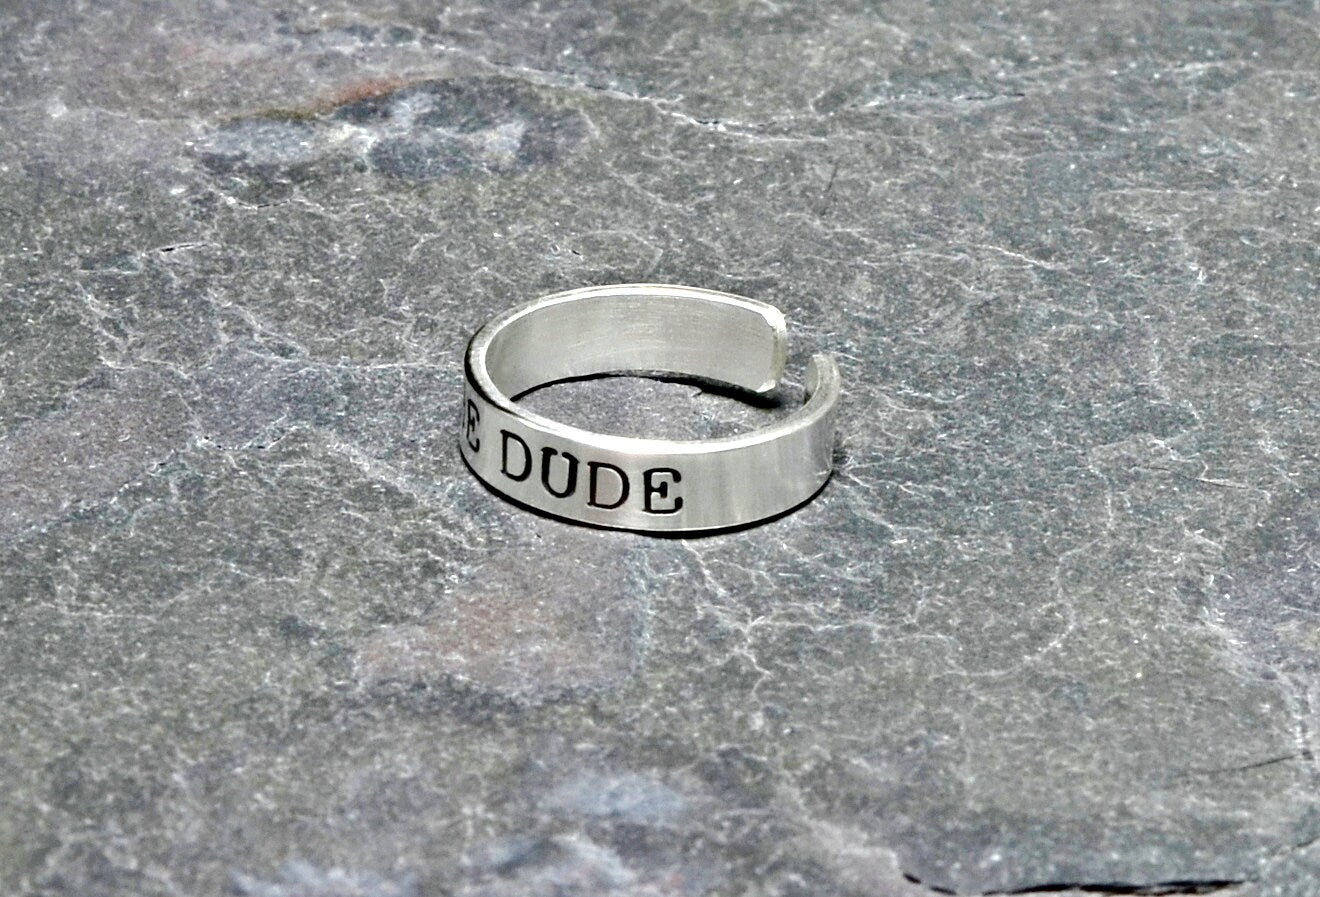 Men's sterling silver toe ring with I'm the dude